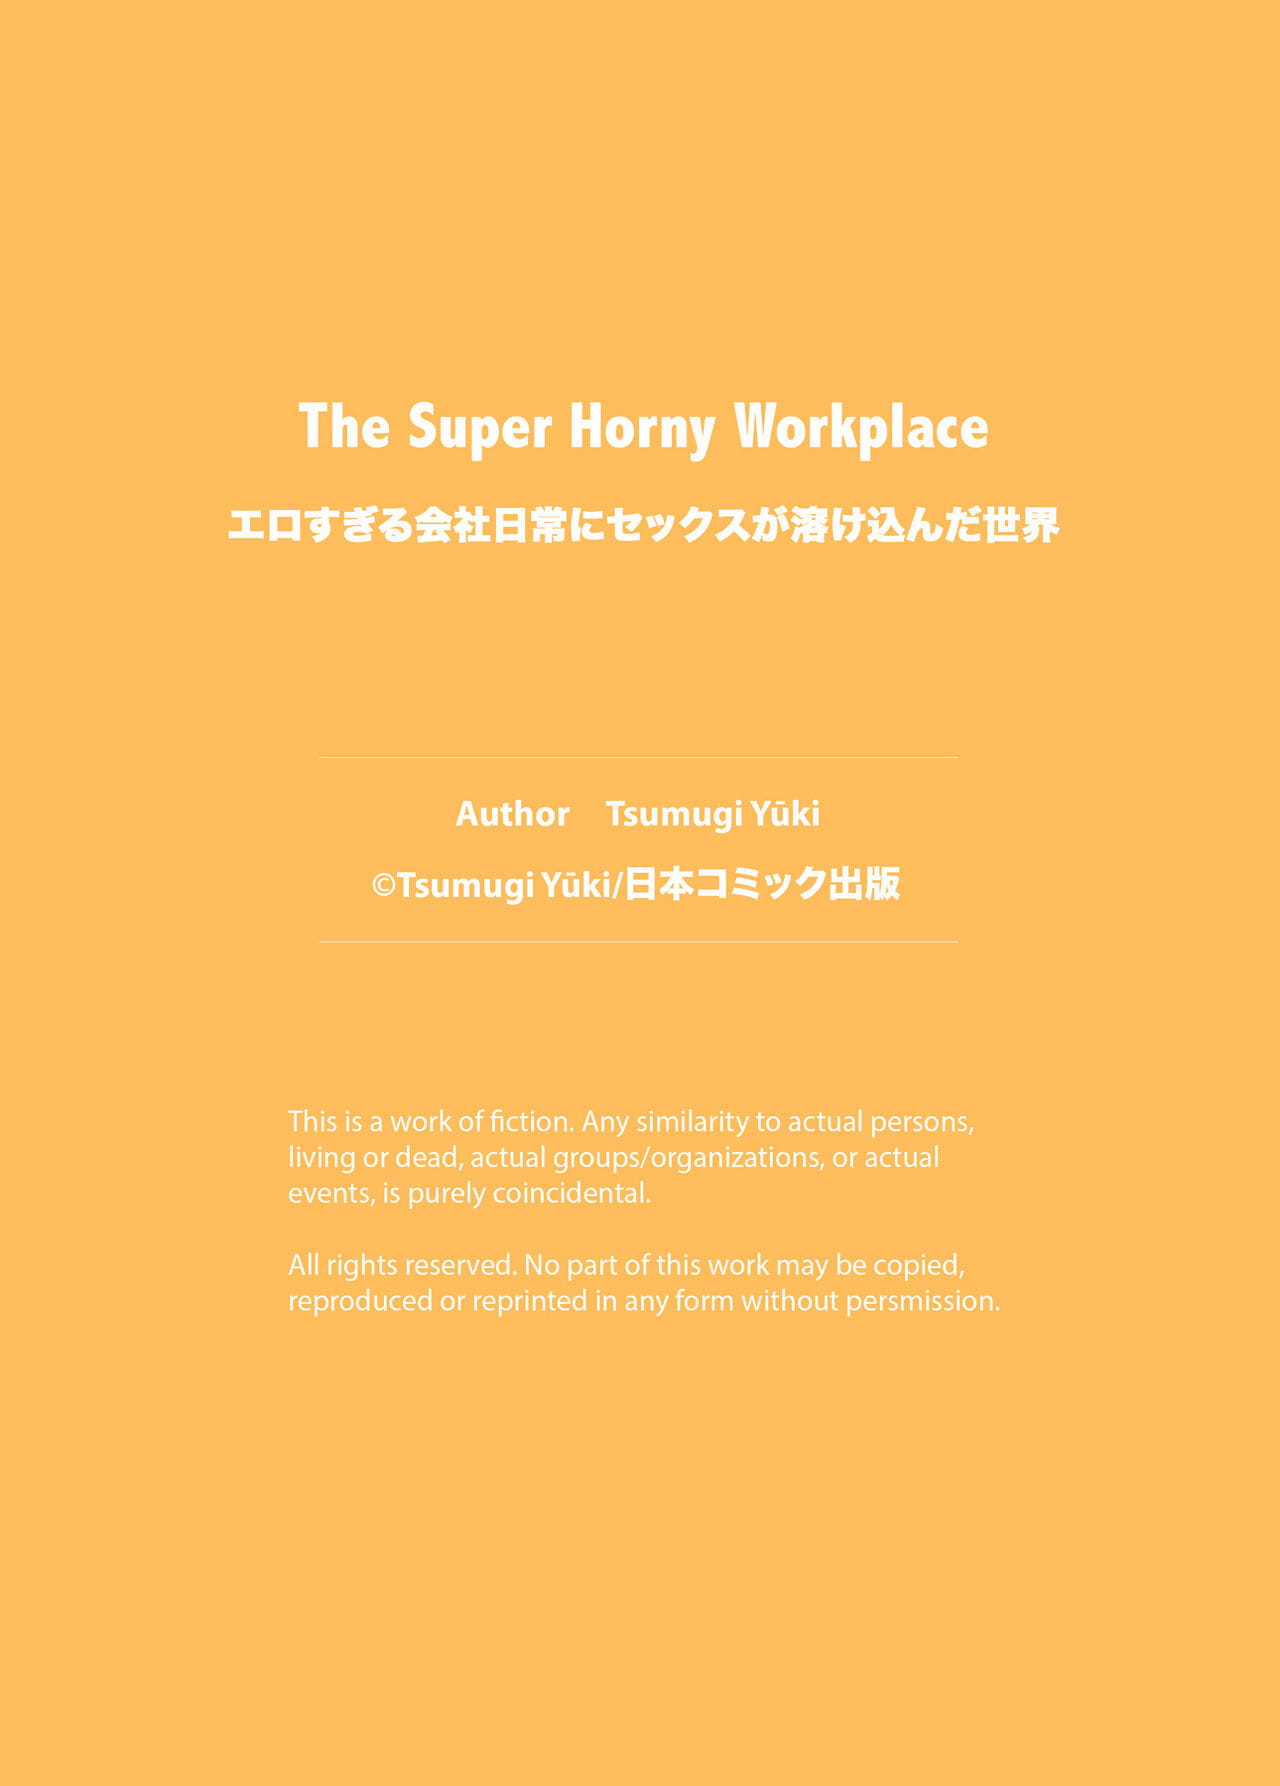 The Super Horny Workplace page 1